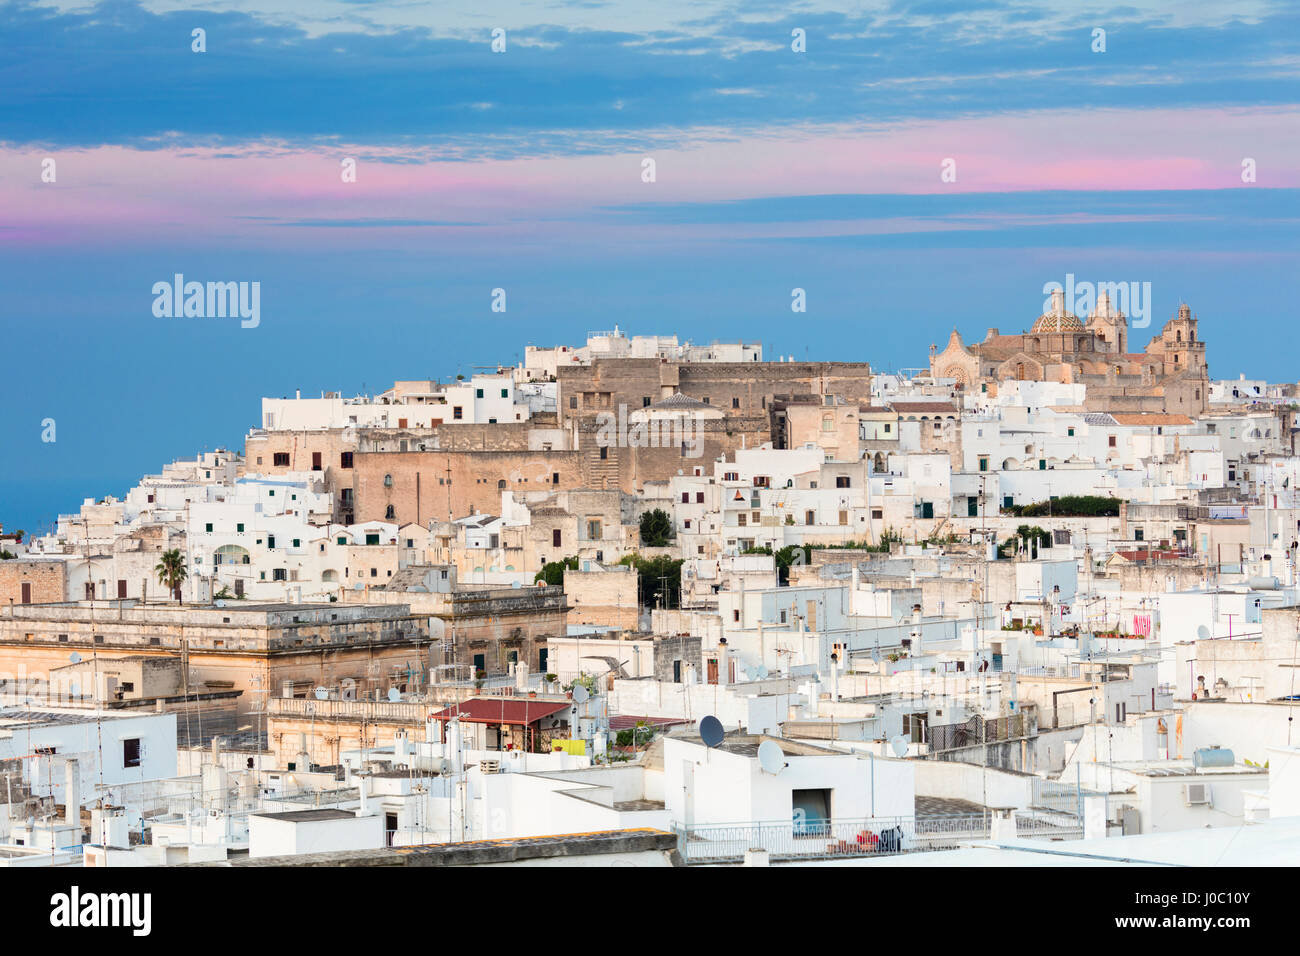 View of typical architecture and white houses of the old medieval town at sunset, Ostuni, Province of Brindisi, Apulia, Italy Stock Photo